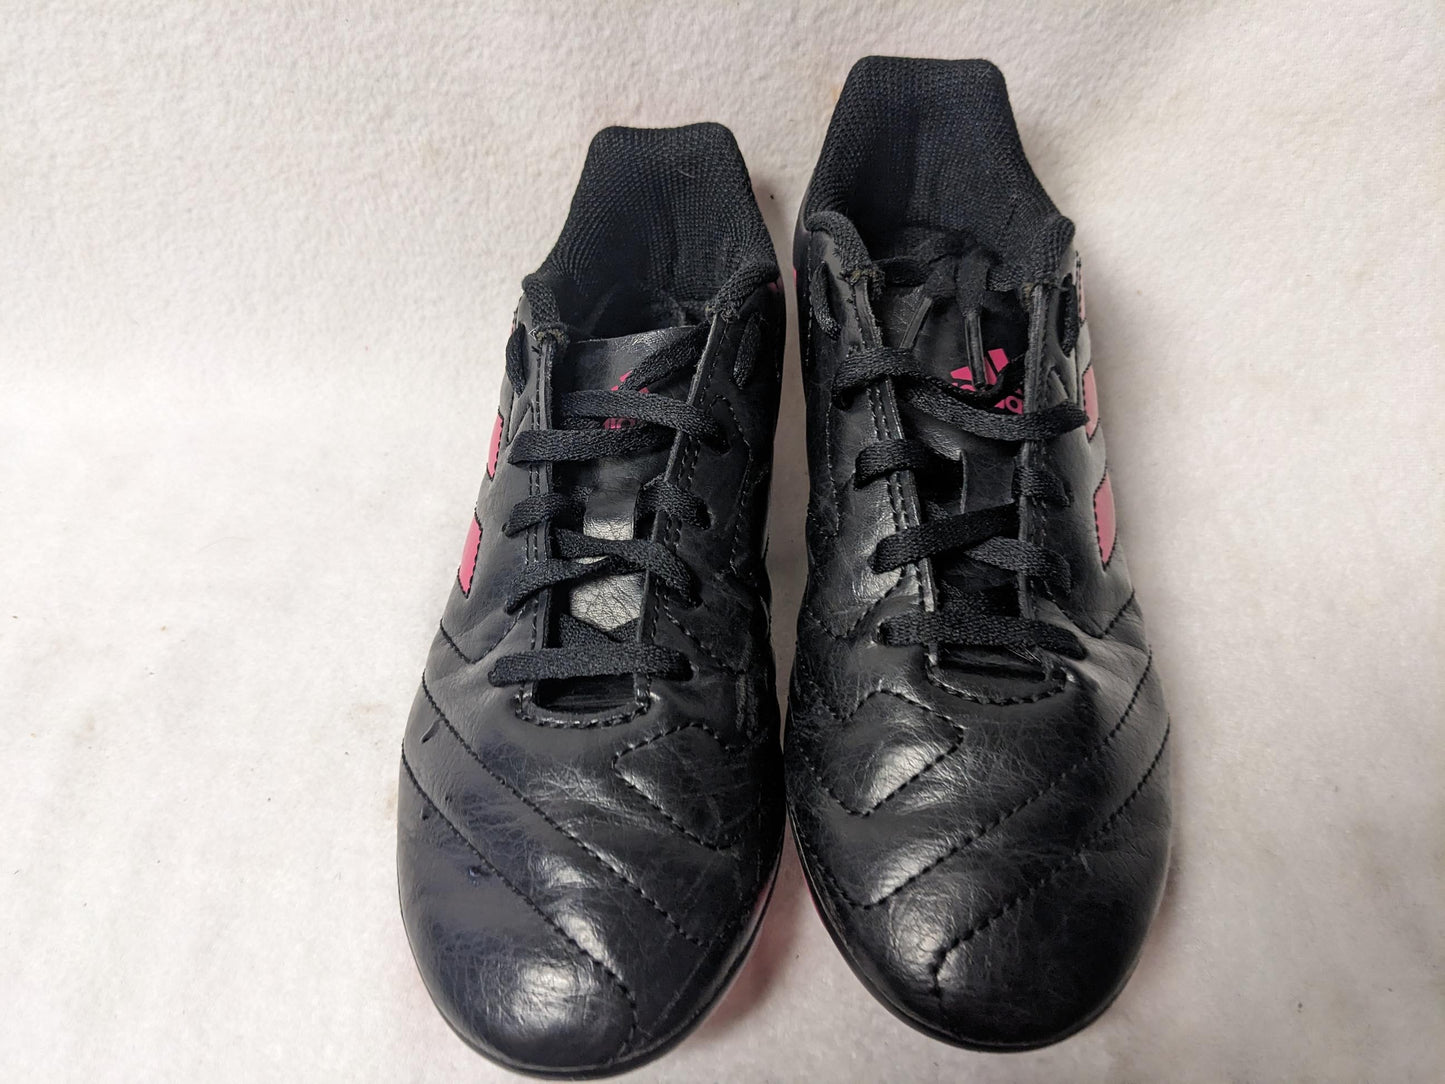 Adidas Youth Cleats Size 3.5 Color Pink Condition Used